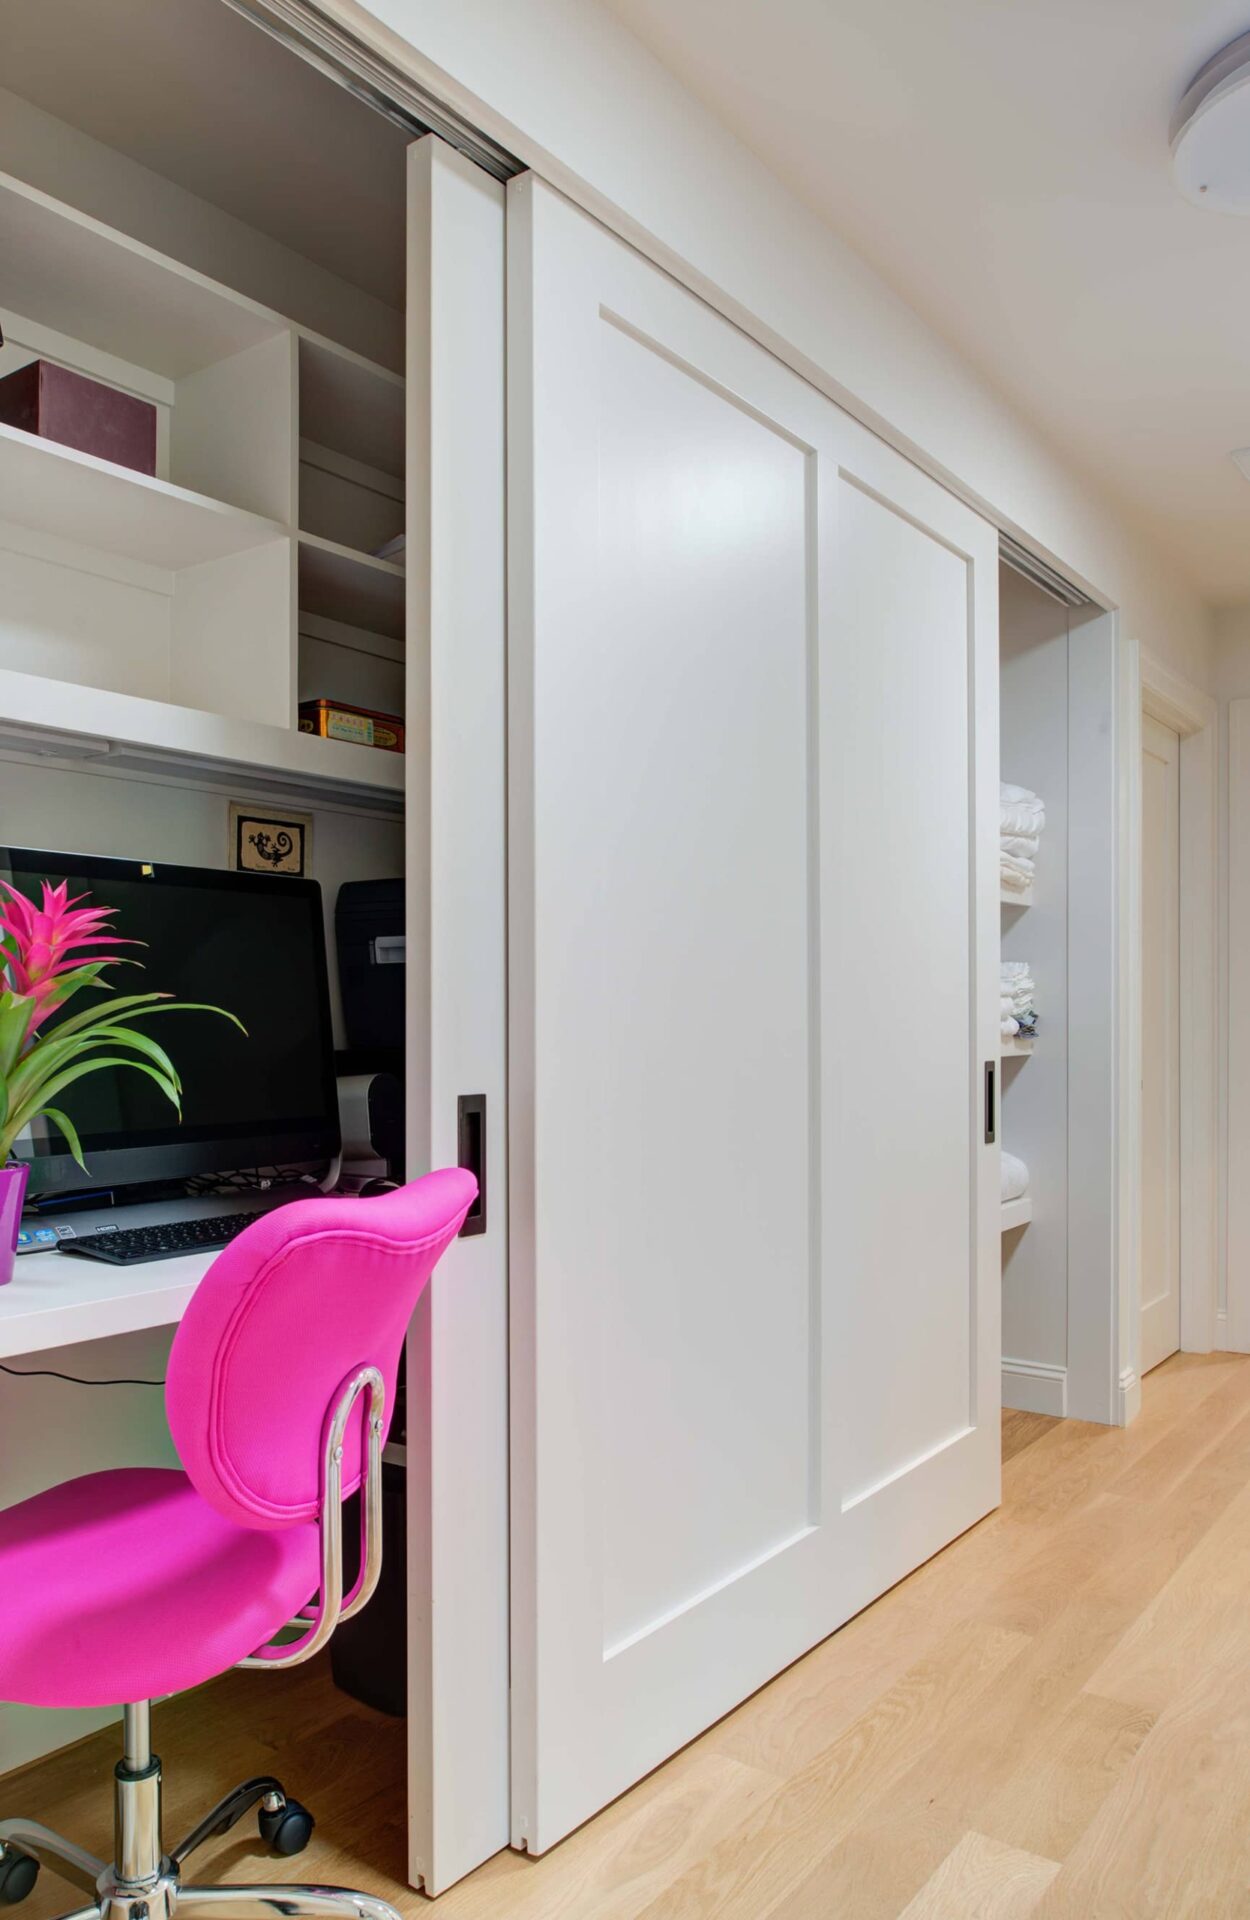 Office space built into closet with pink desk chair.